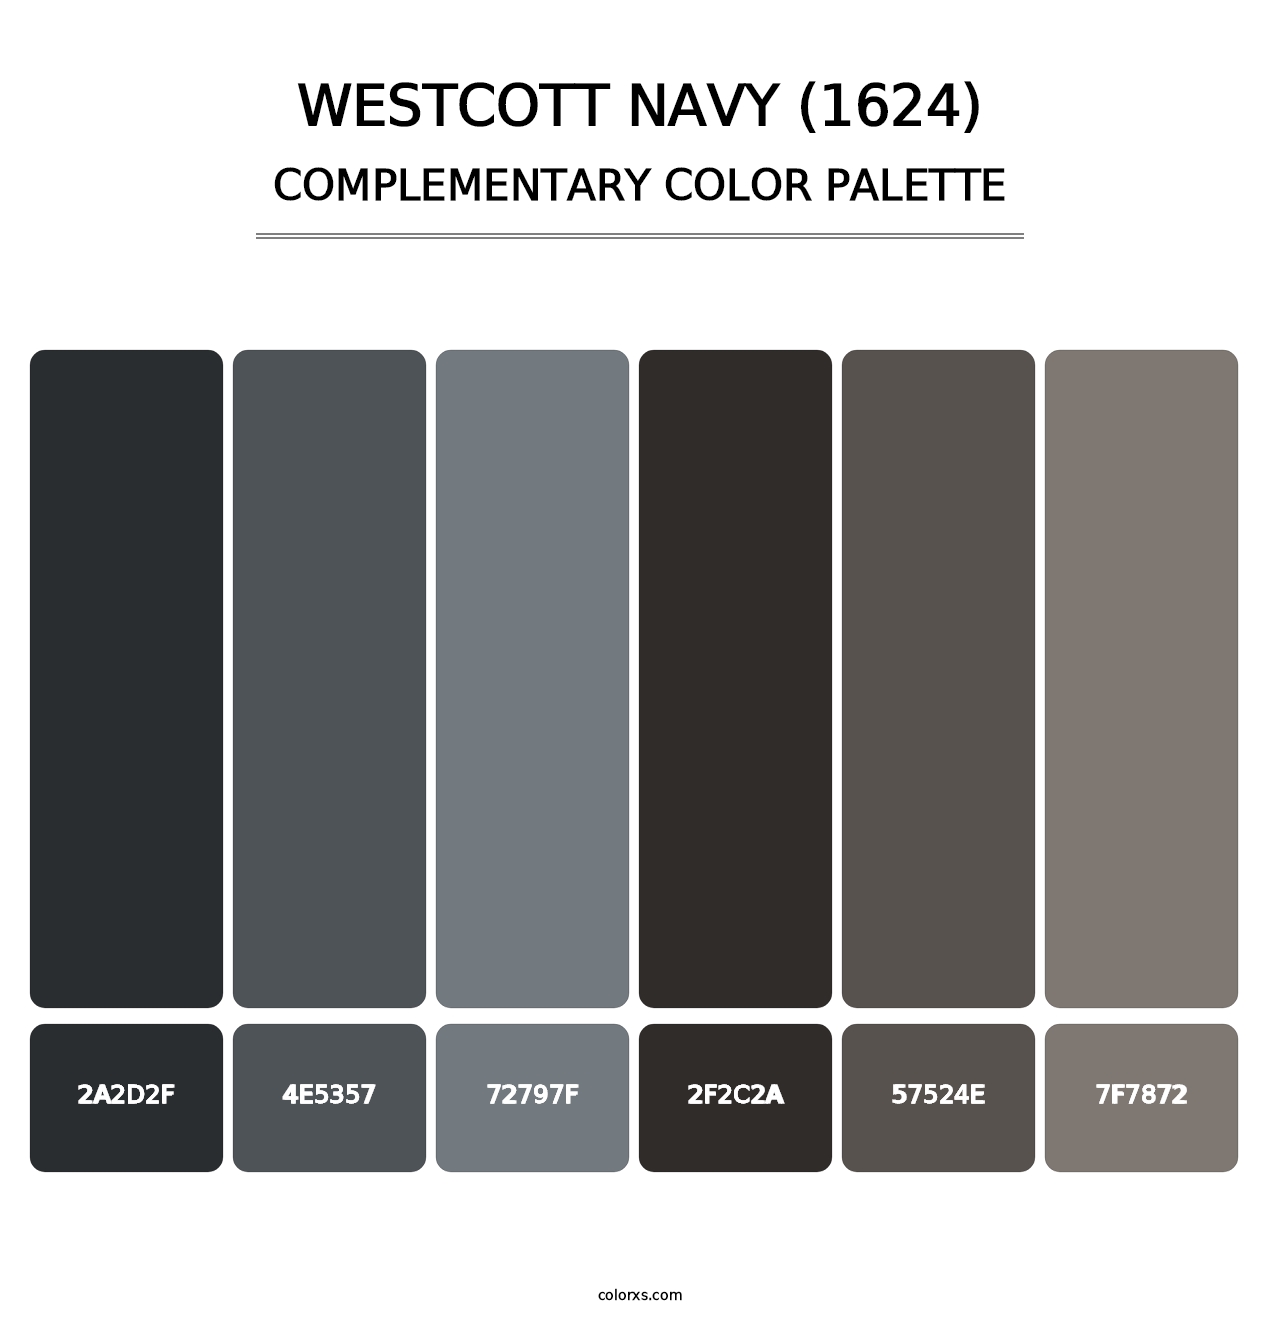 Westcott Navy (1624) - Complementary Color Palette